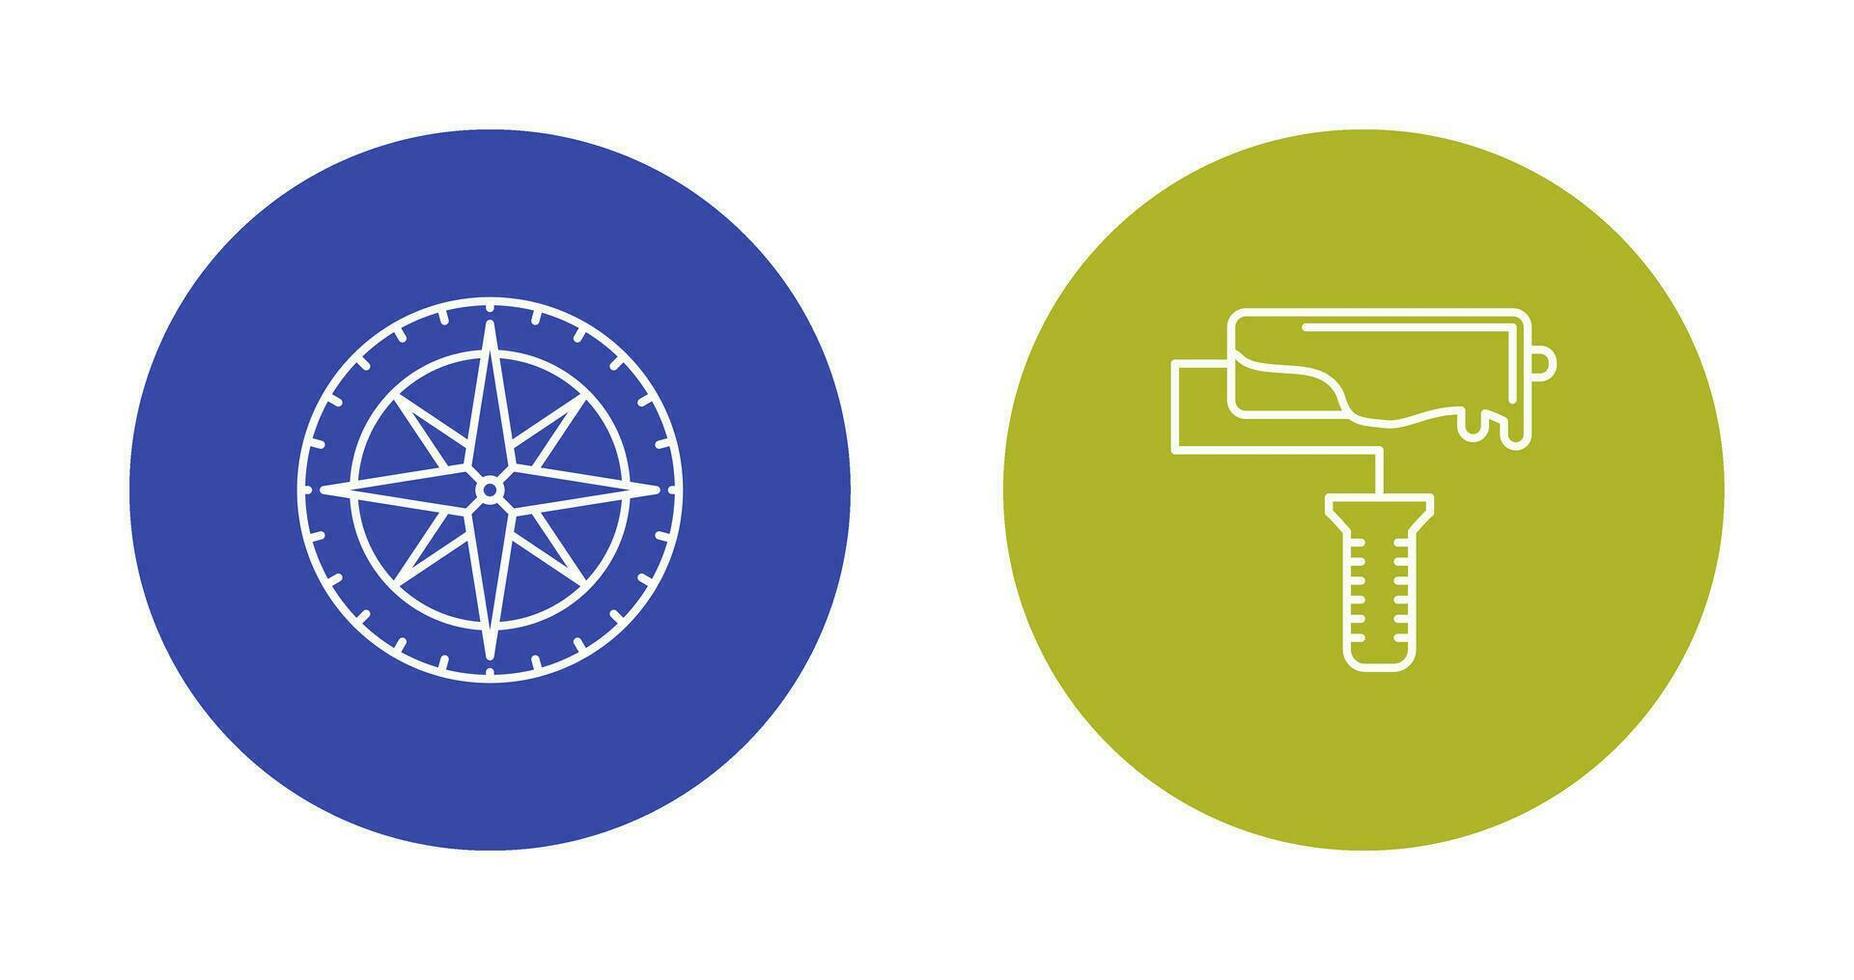 Compass and Roller Icon vector